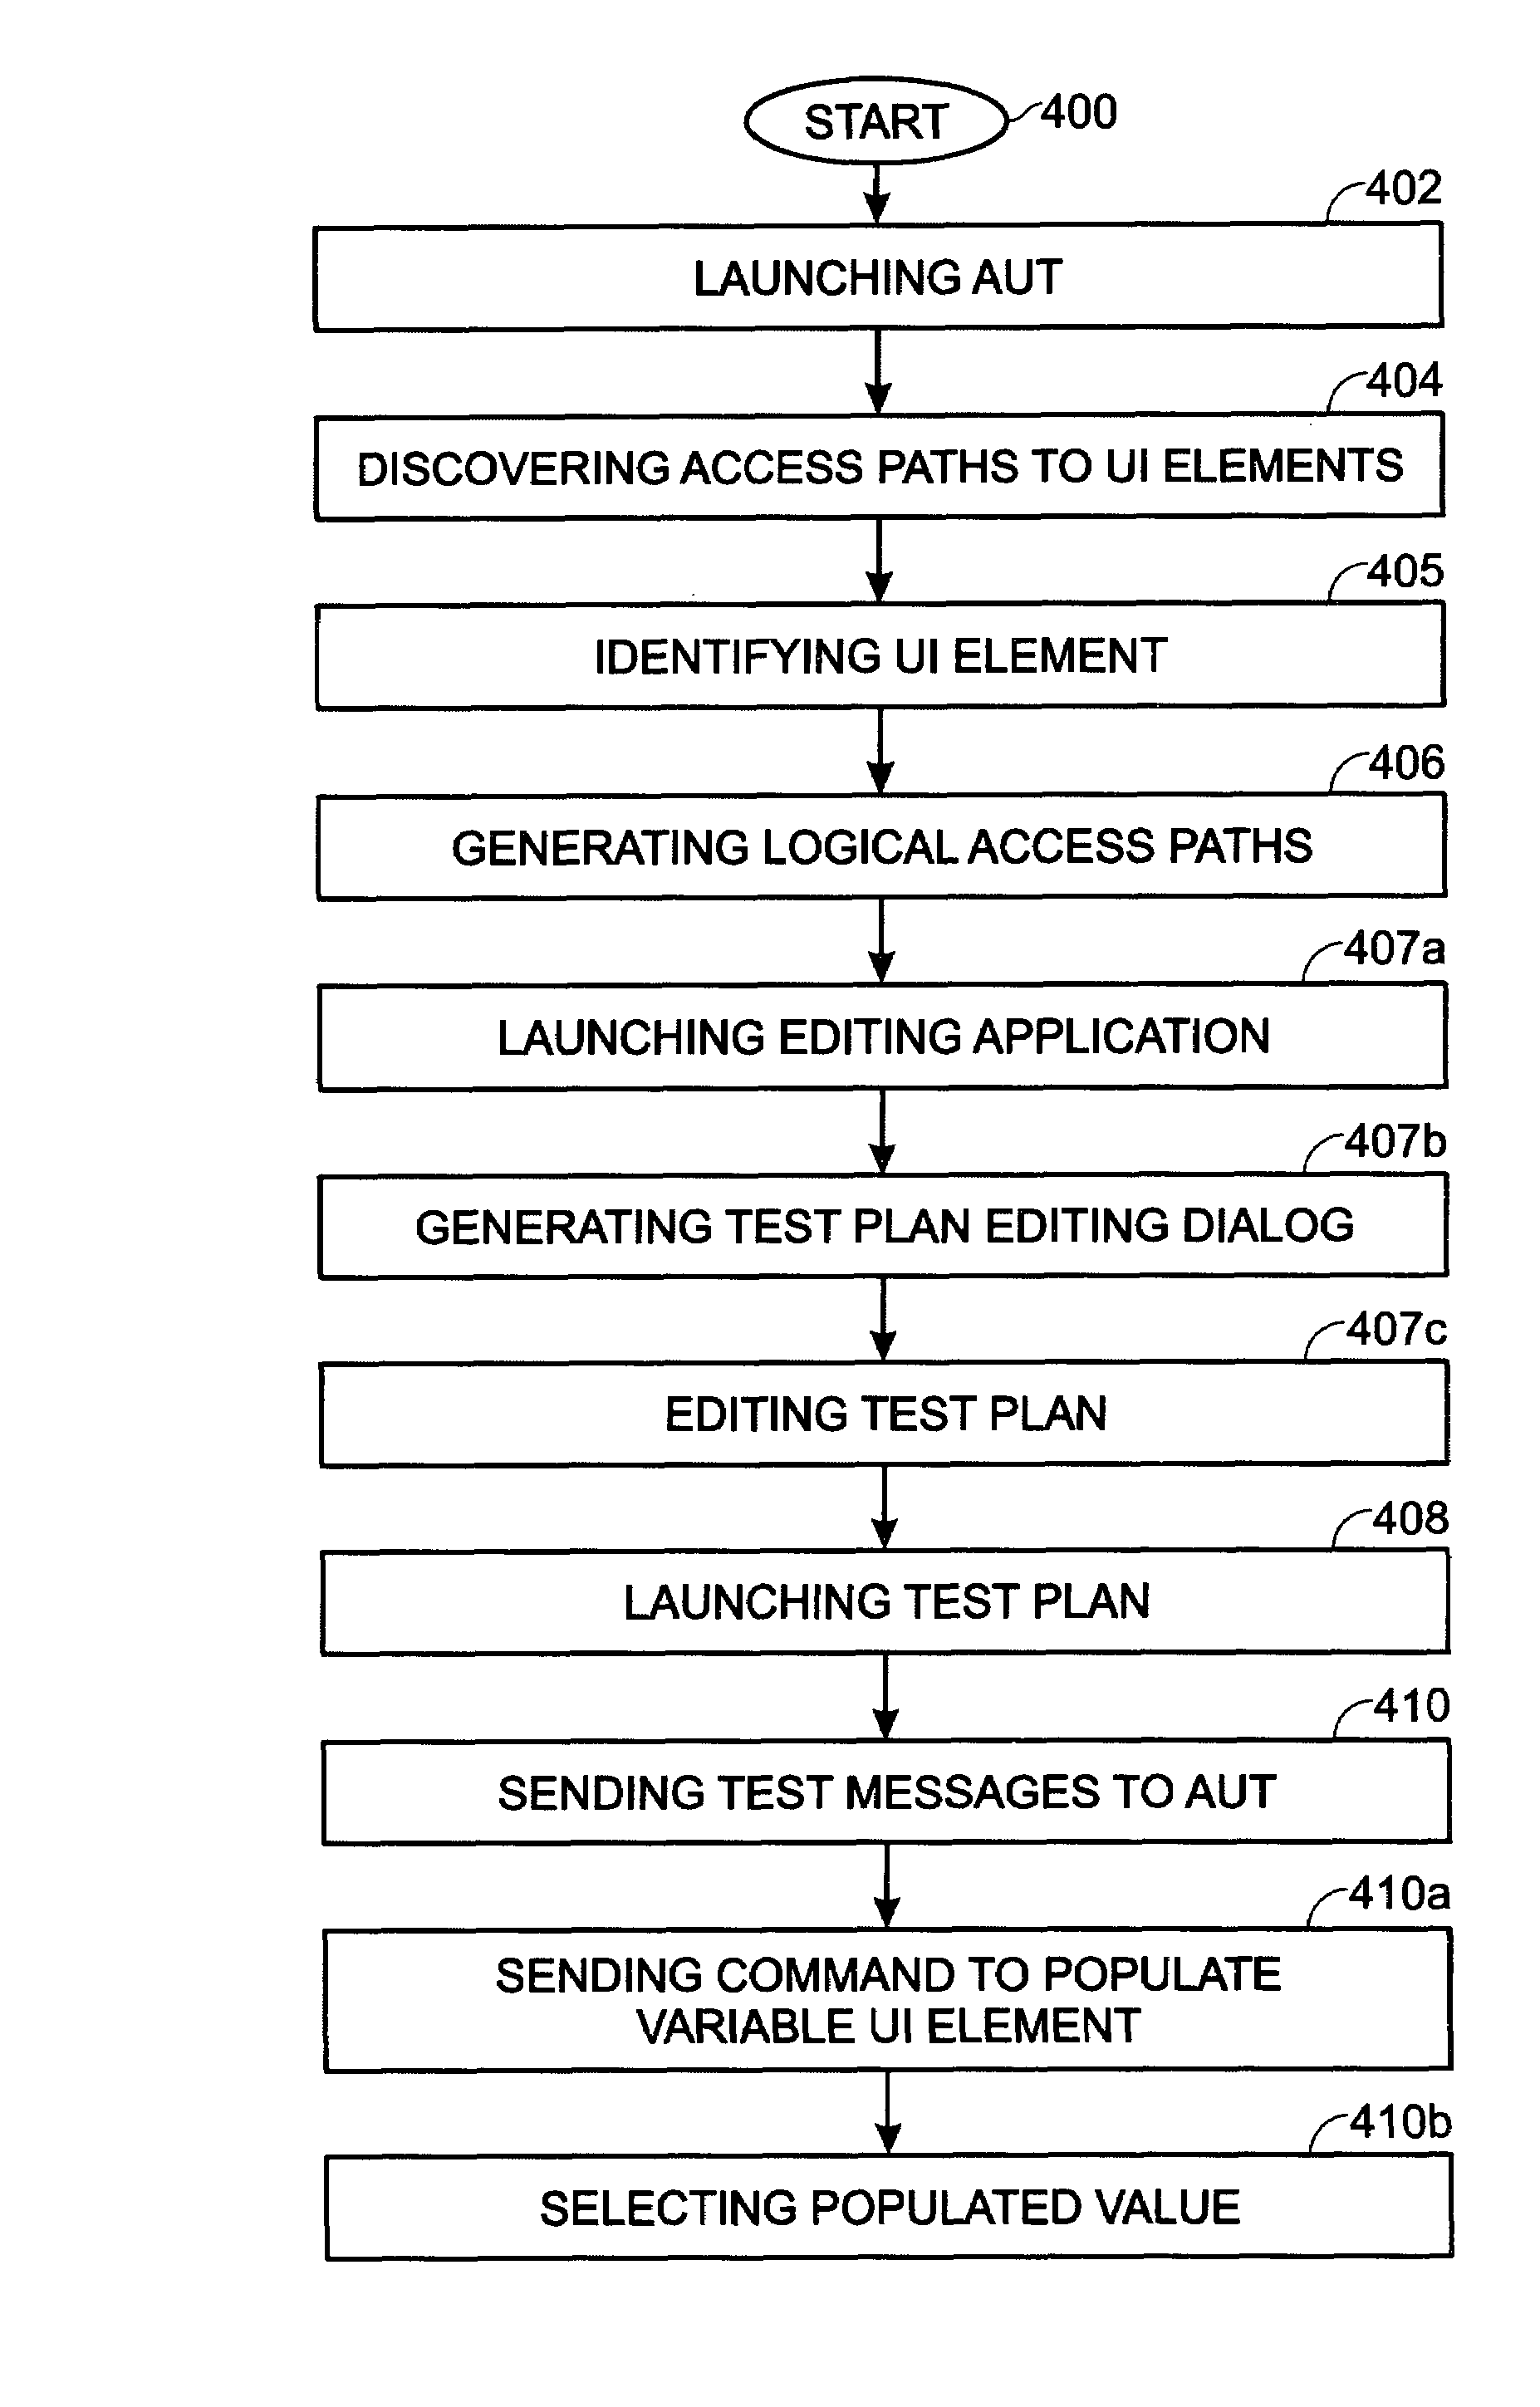 System and method for generating automatic test plans for graphical user interface applications